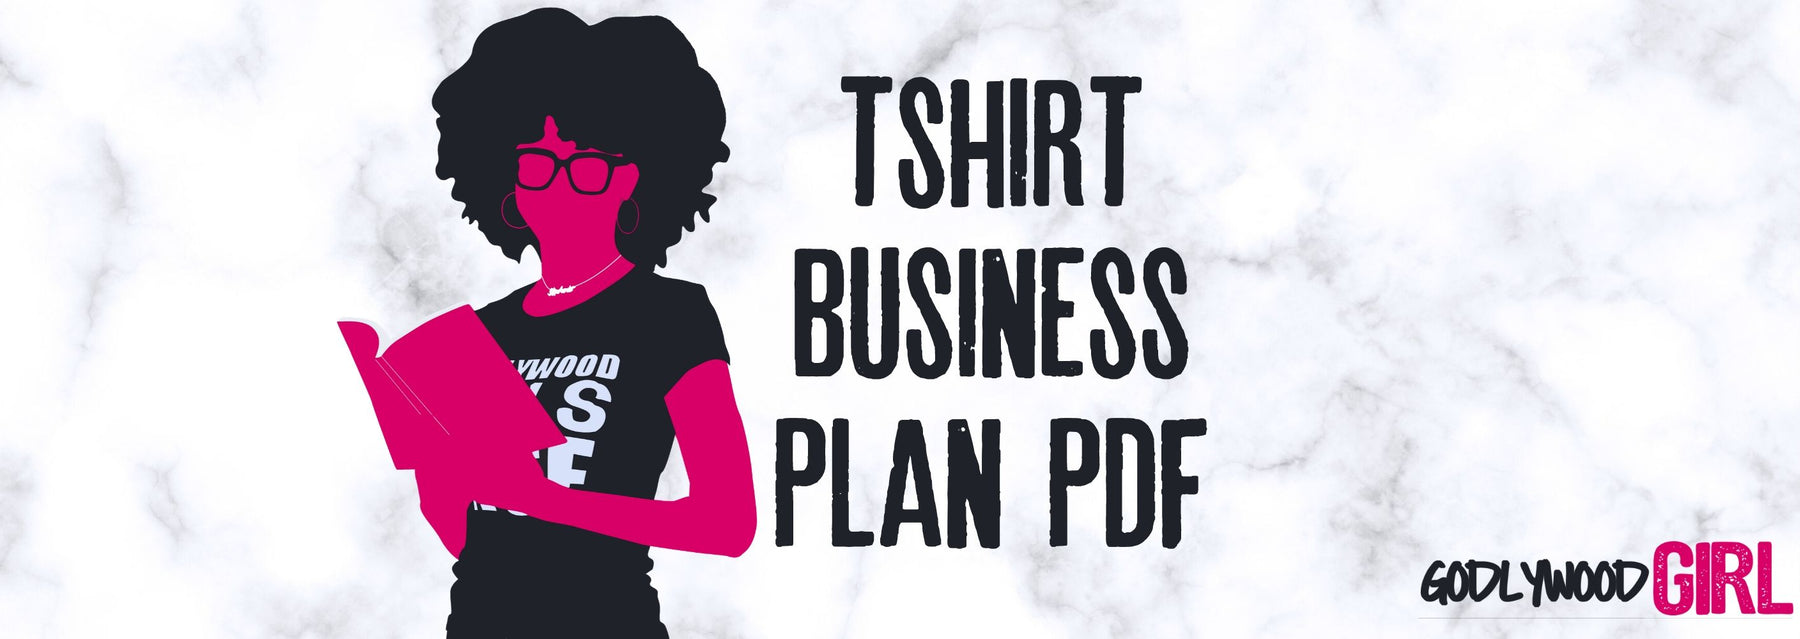 T SHIRT BUSINESS PLAN PDF || (How to start your own T-shirt business)